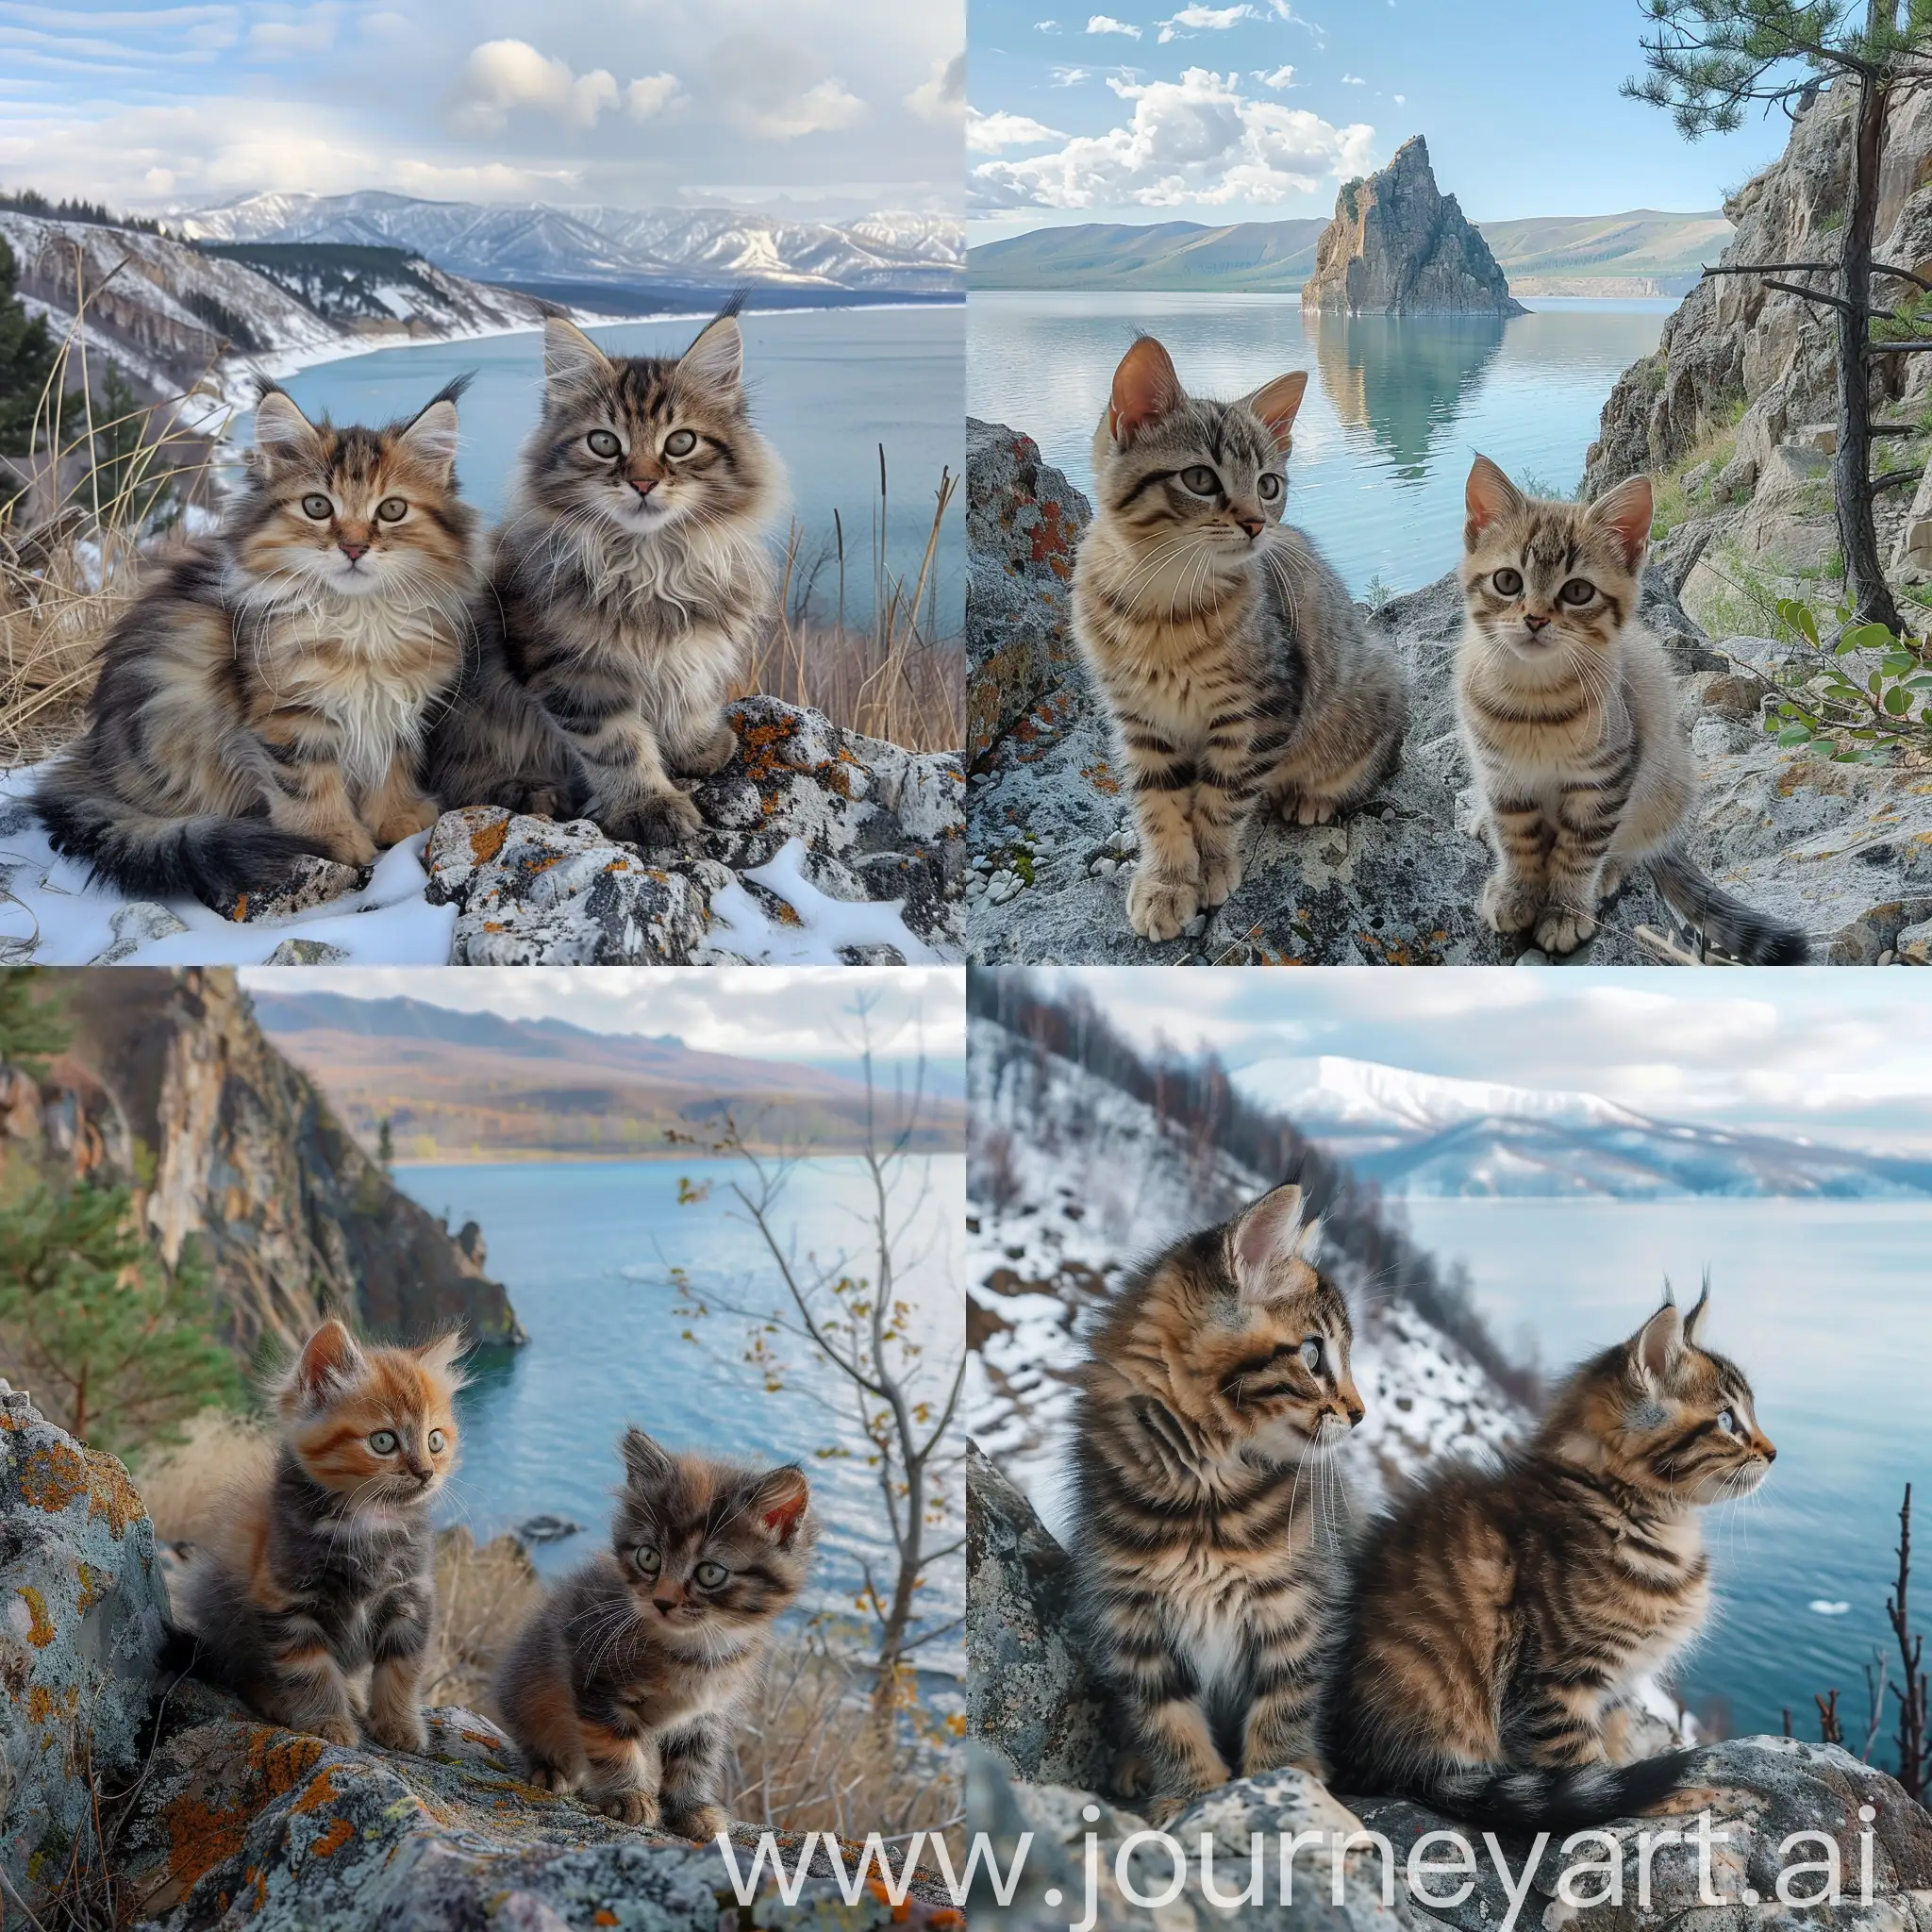 two girls-kittens went to a trip to lake Baikal